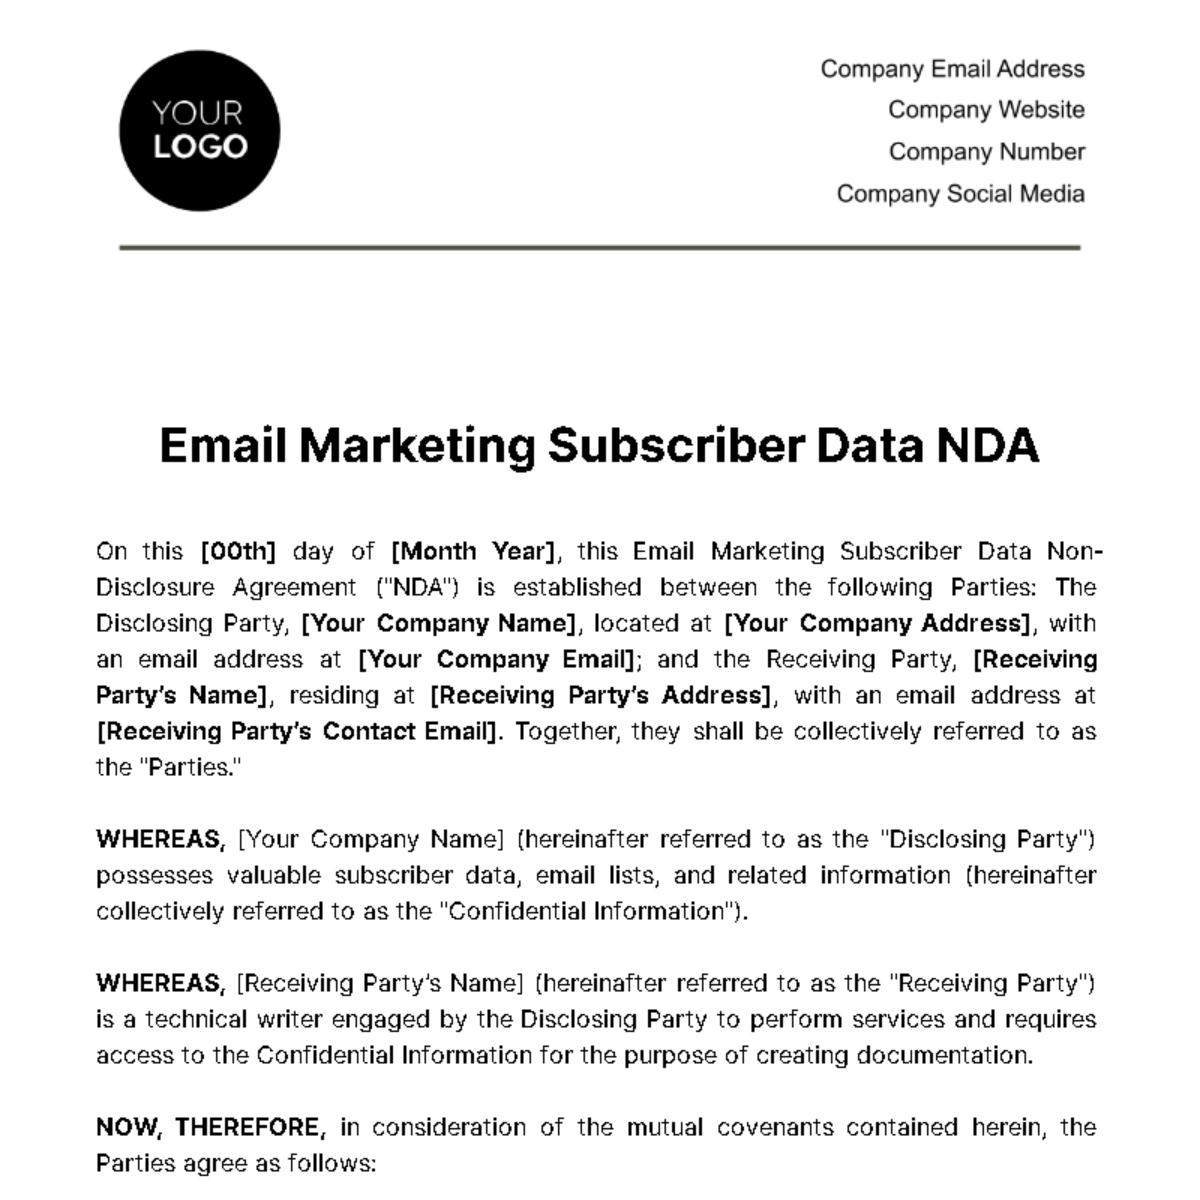 Free Email Marketing Subscriber Data NDA (Non-Disclosure Agreement) Template